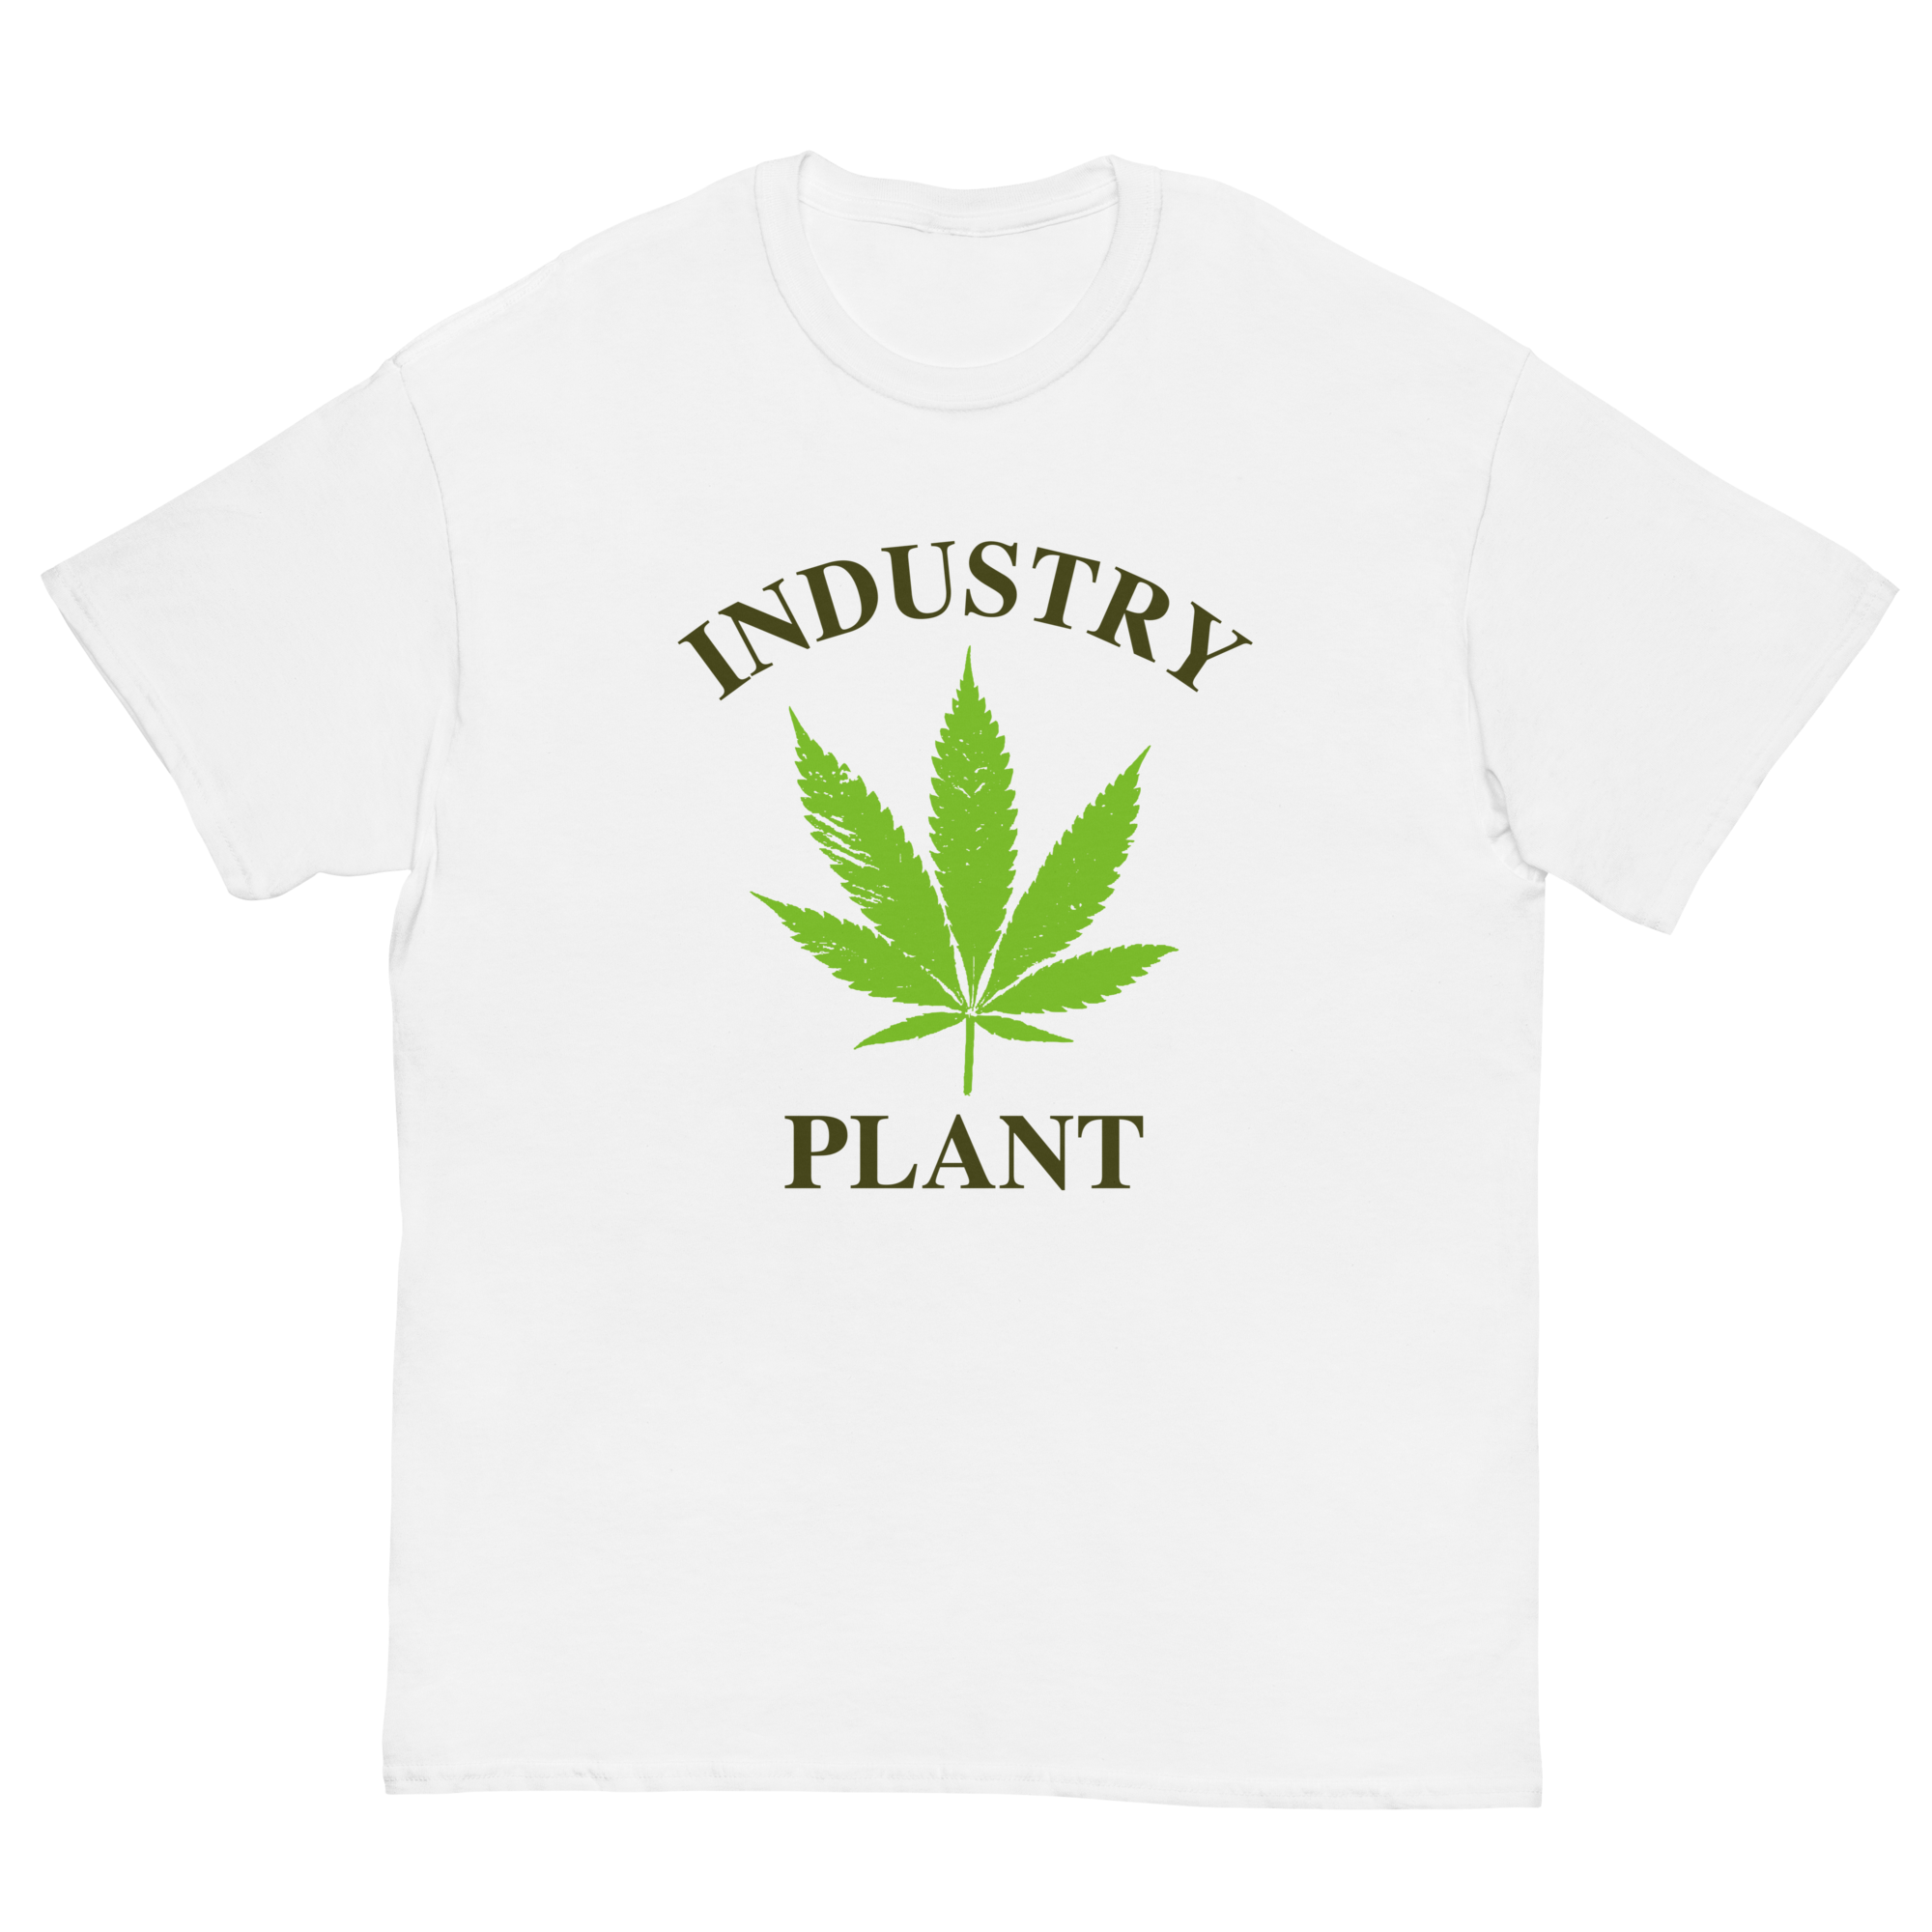 INDUSTRY PLANT T-SHIRT